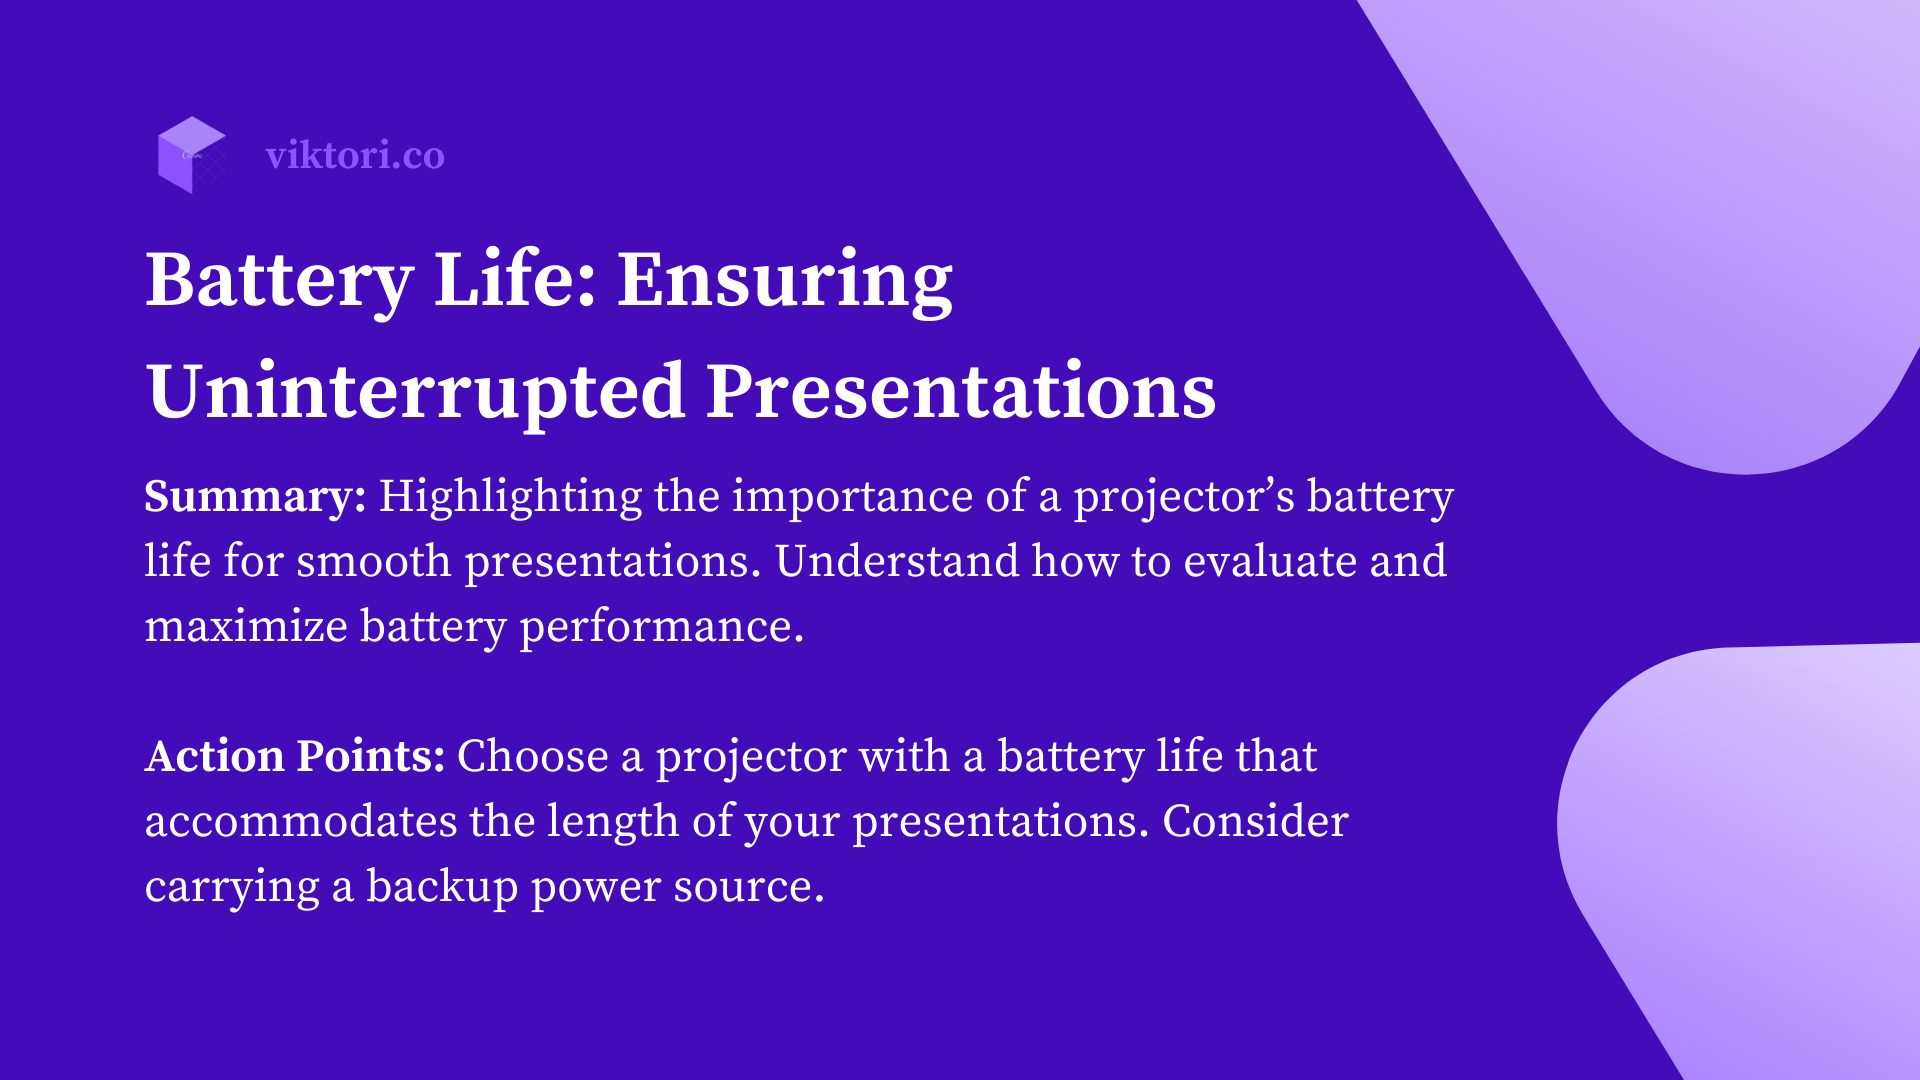 battery life section about portable projectors